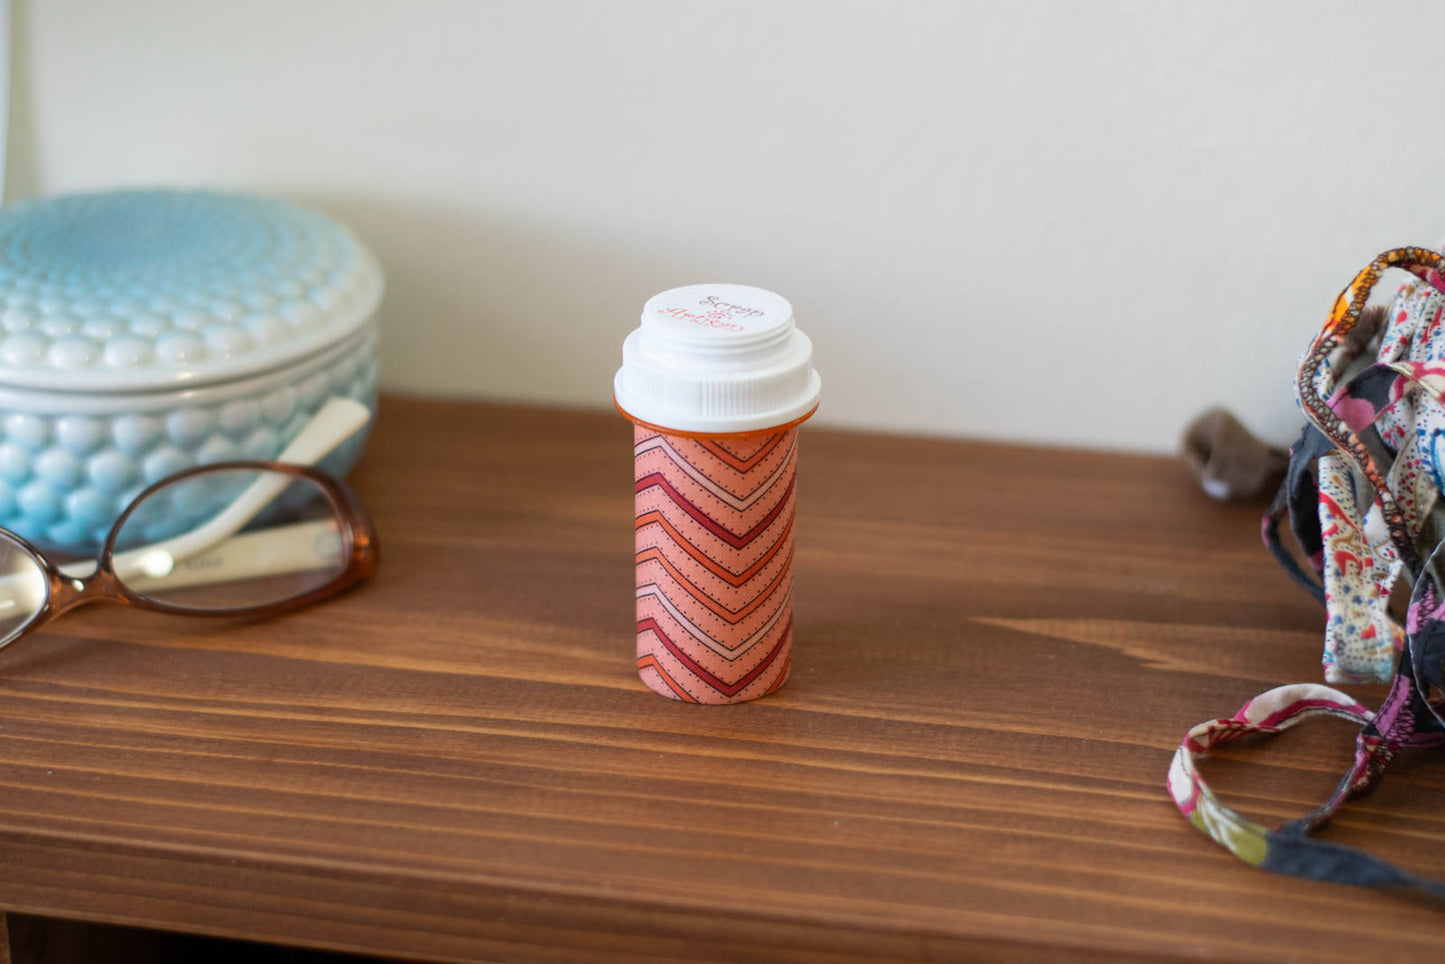 Upcycled Prescription Bottle Sewing Kit — Red and Orange Chevron with Dots on Pink, 3.25" high, closed